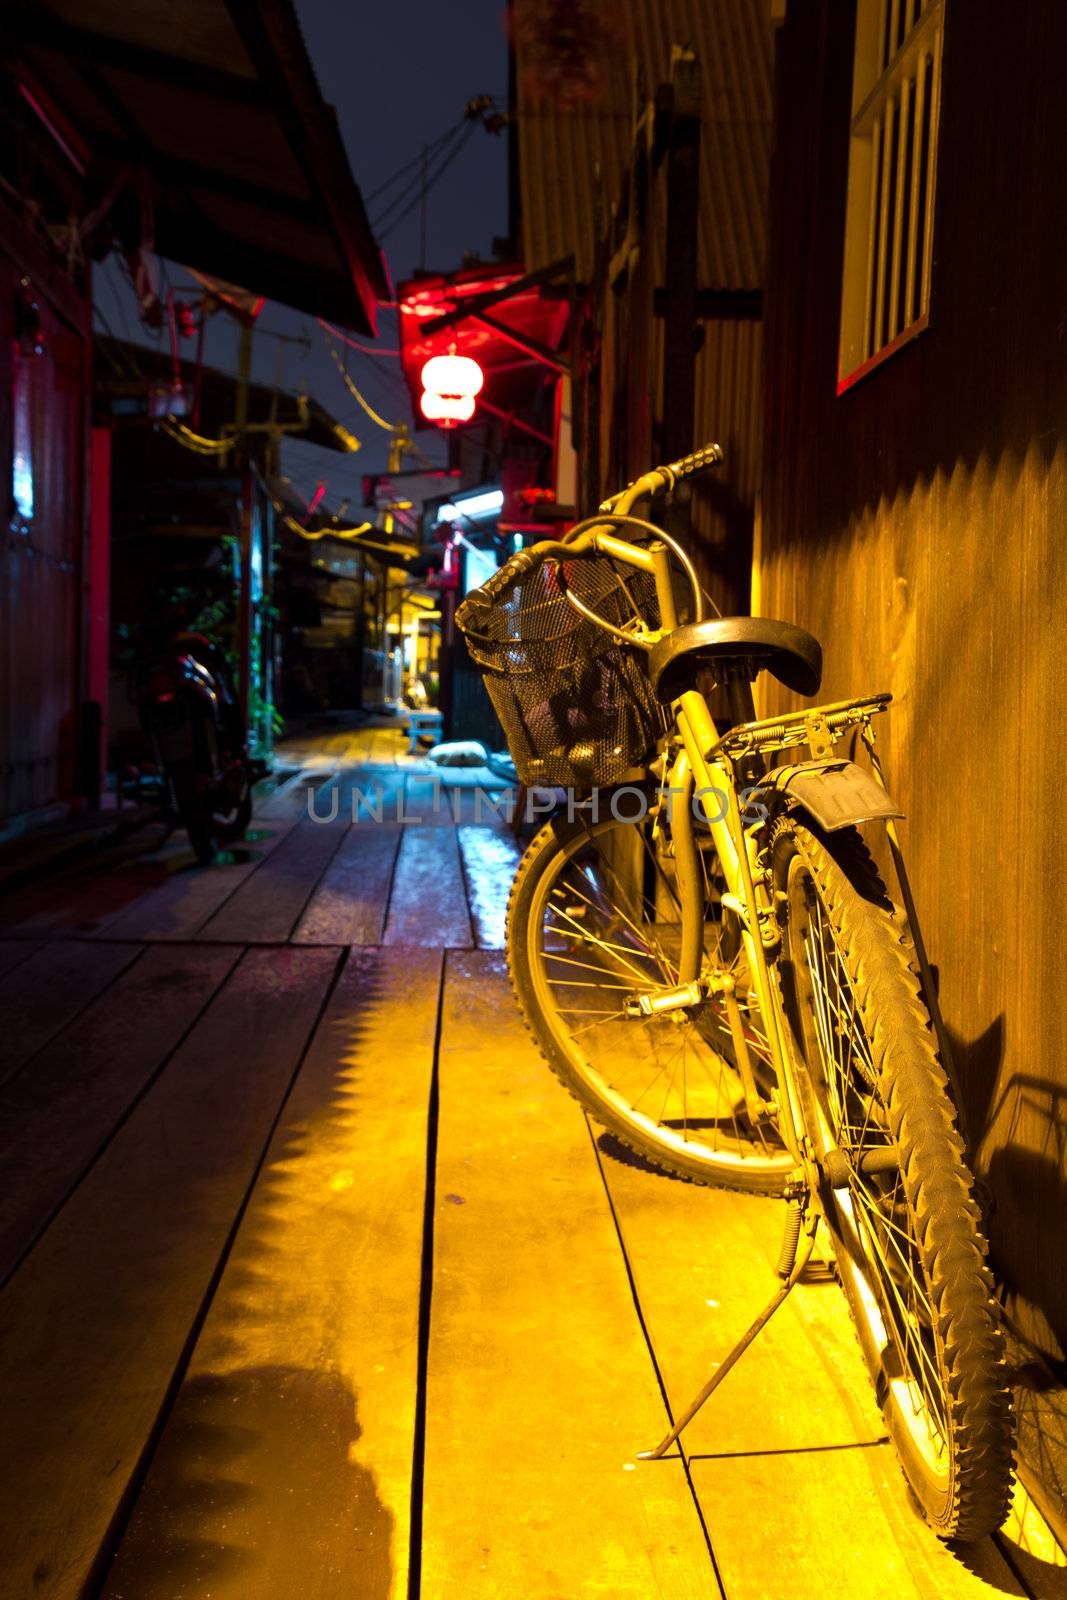 Old bicycle against wooden wall under amber light at night in a quiet street